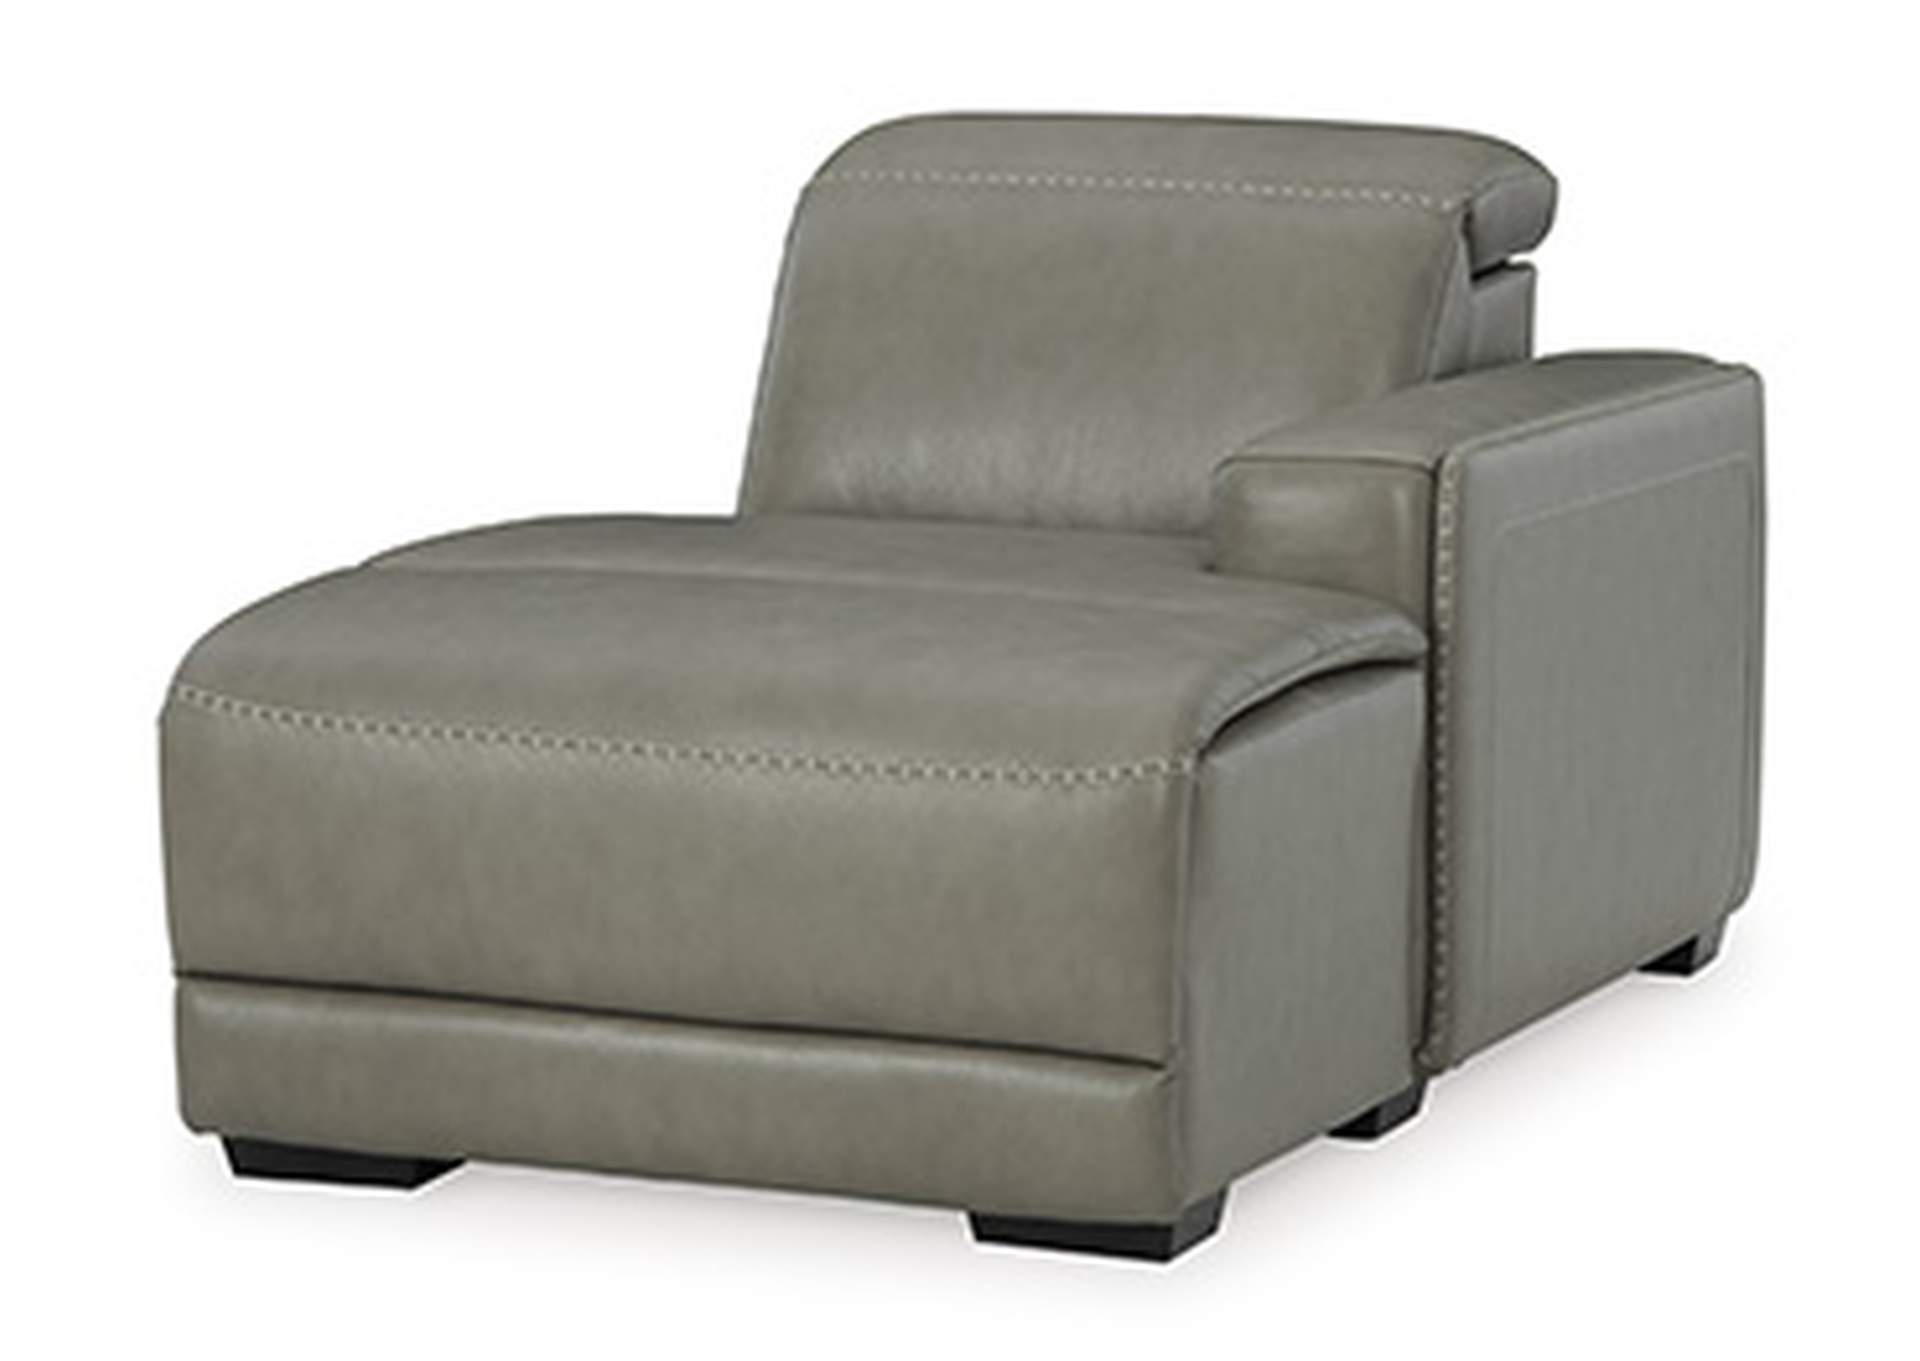 Correze Right-Arm Facing Power Reclining Back Chaise,Signature Design By Ashley